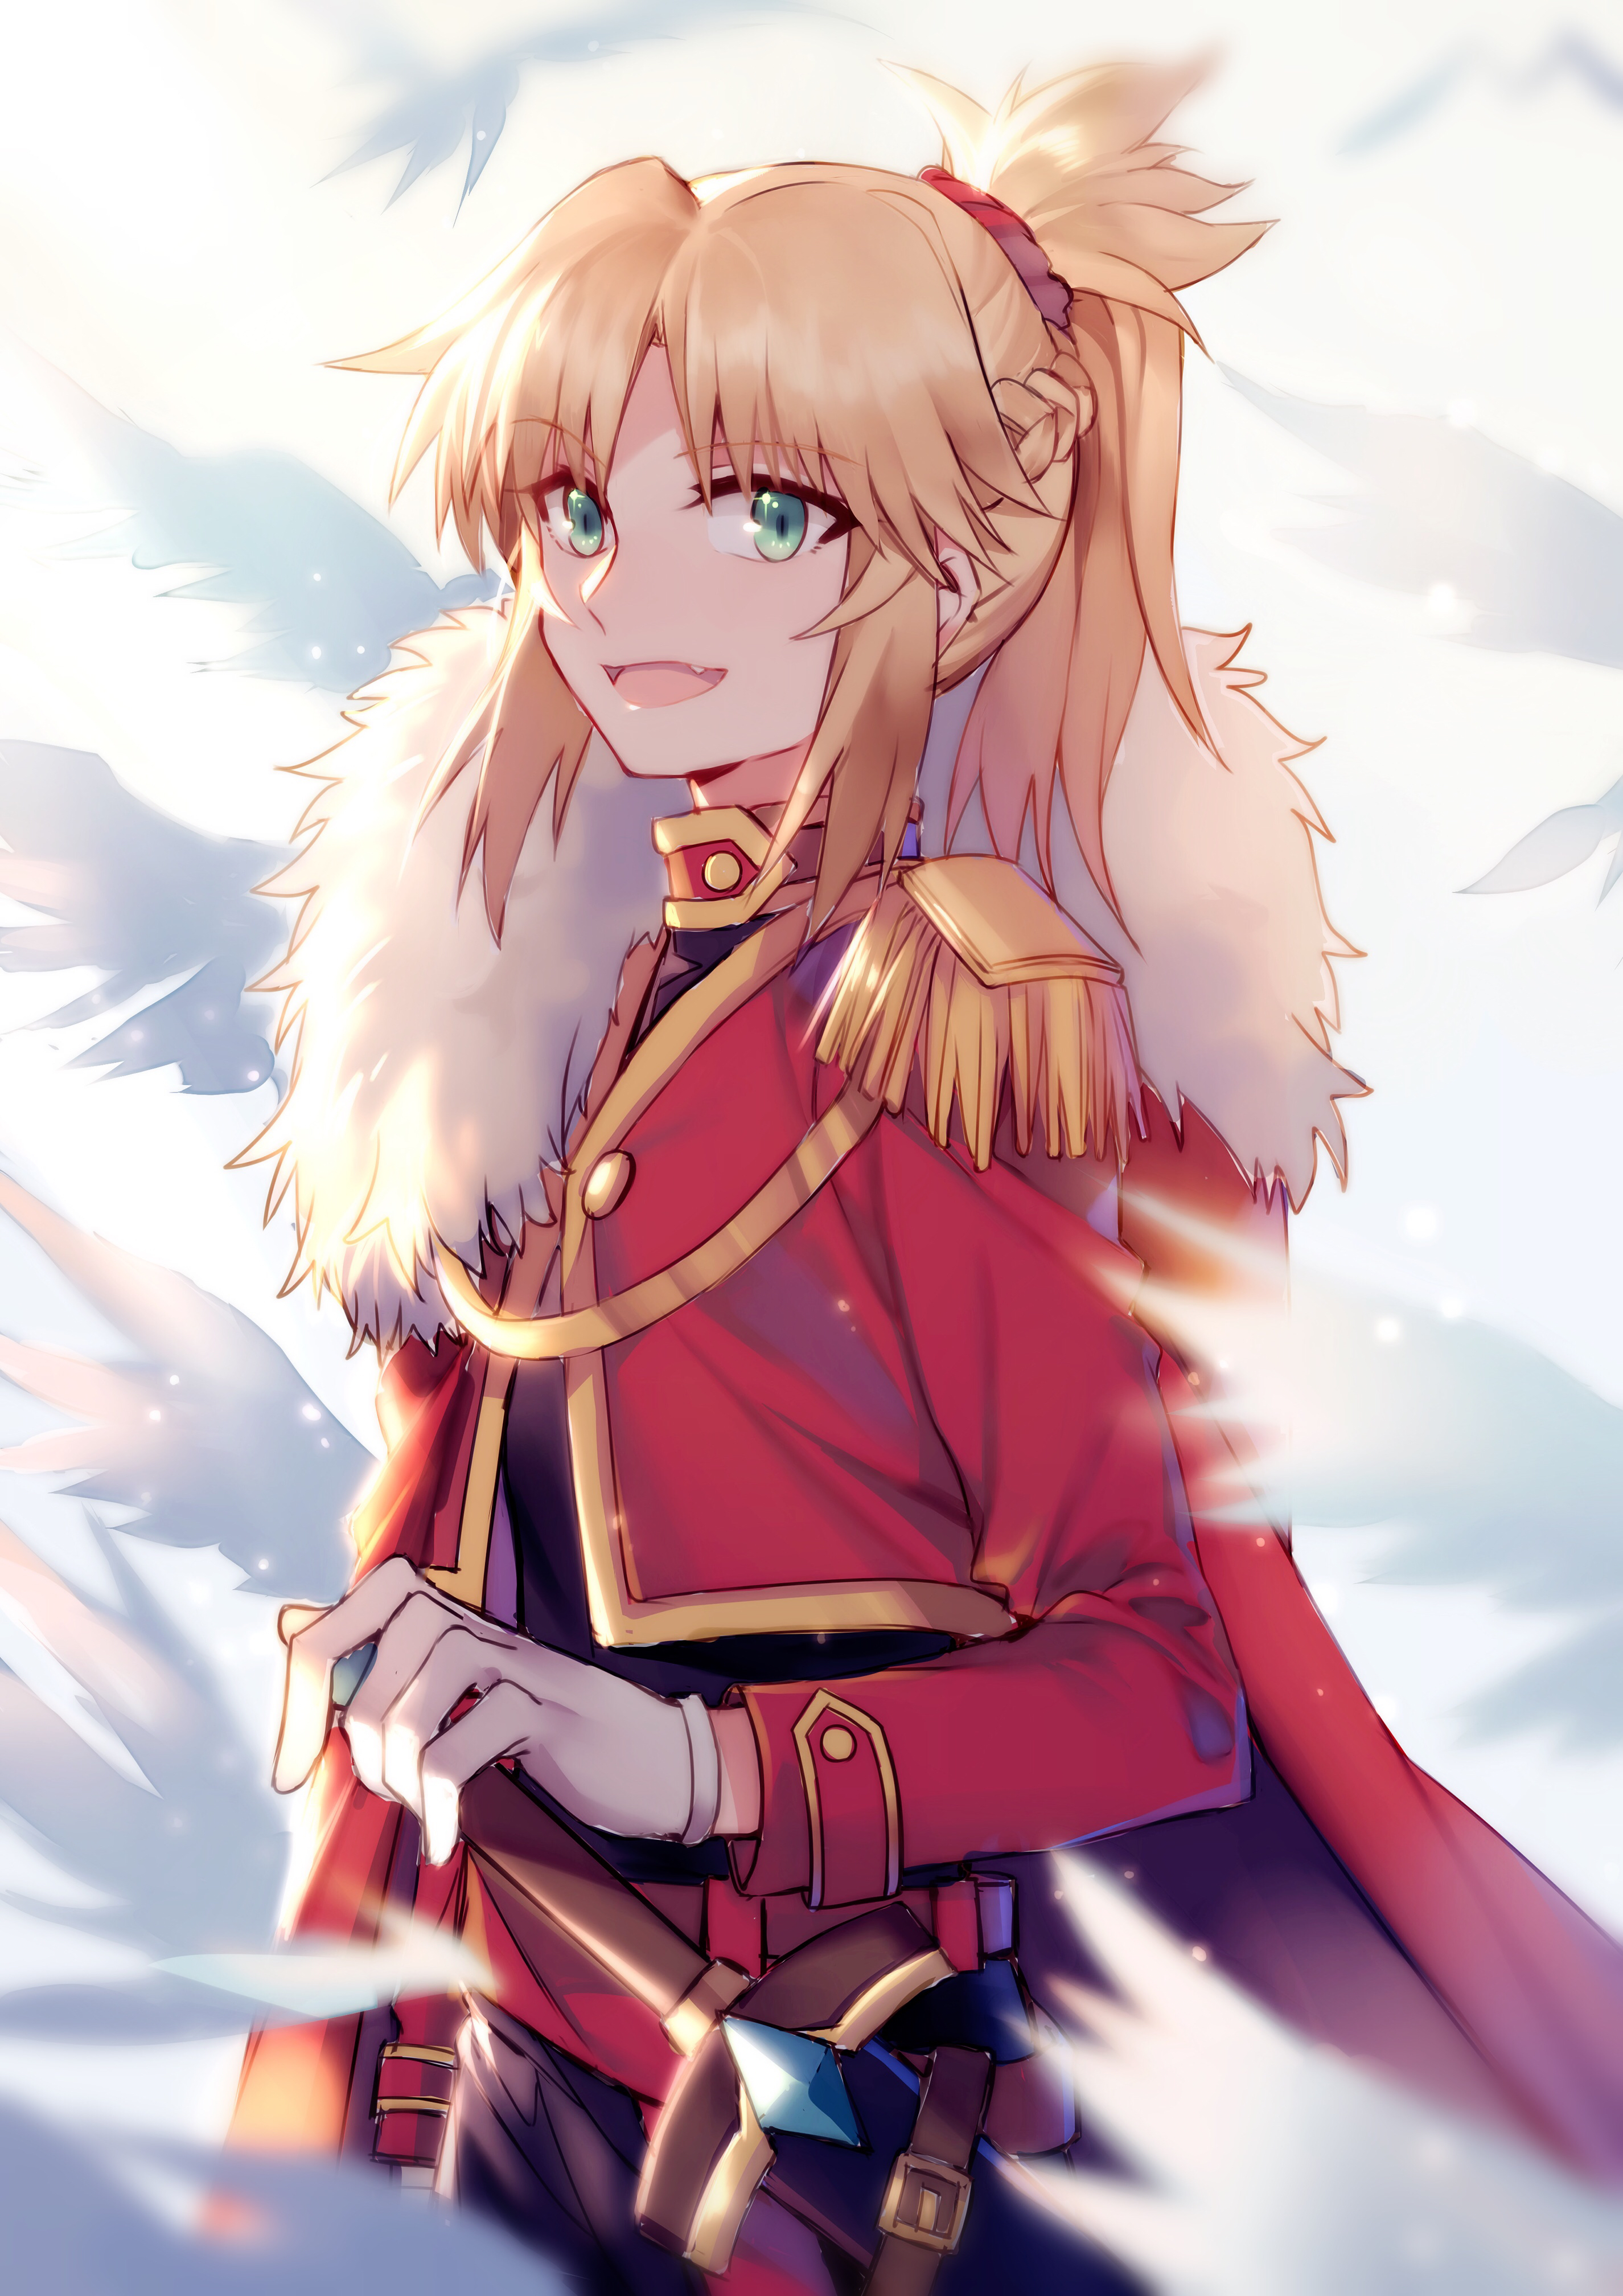 Fate Series Fate Apocrypha Anime Girls Long Hair Blond Hair Green Eyes Feathers Ponytail Saber Of Re 2851x4032